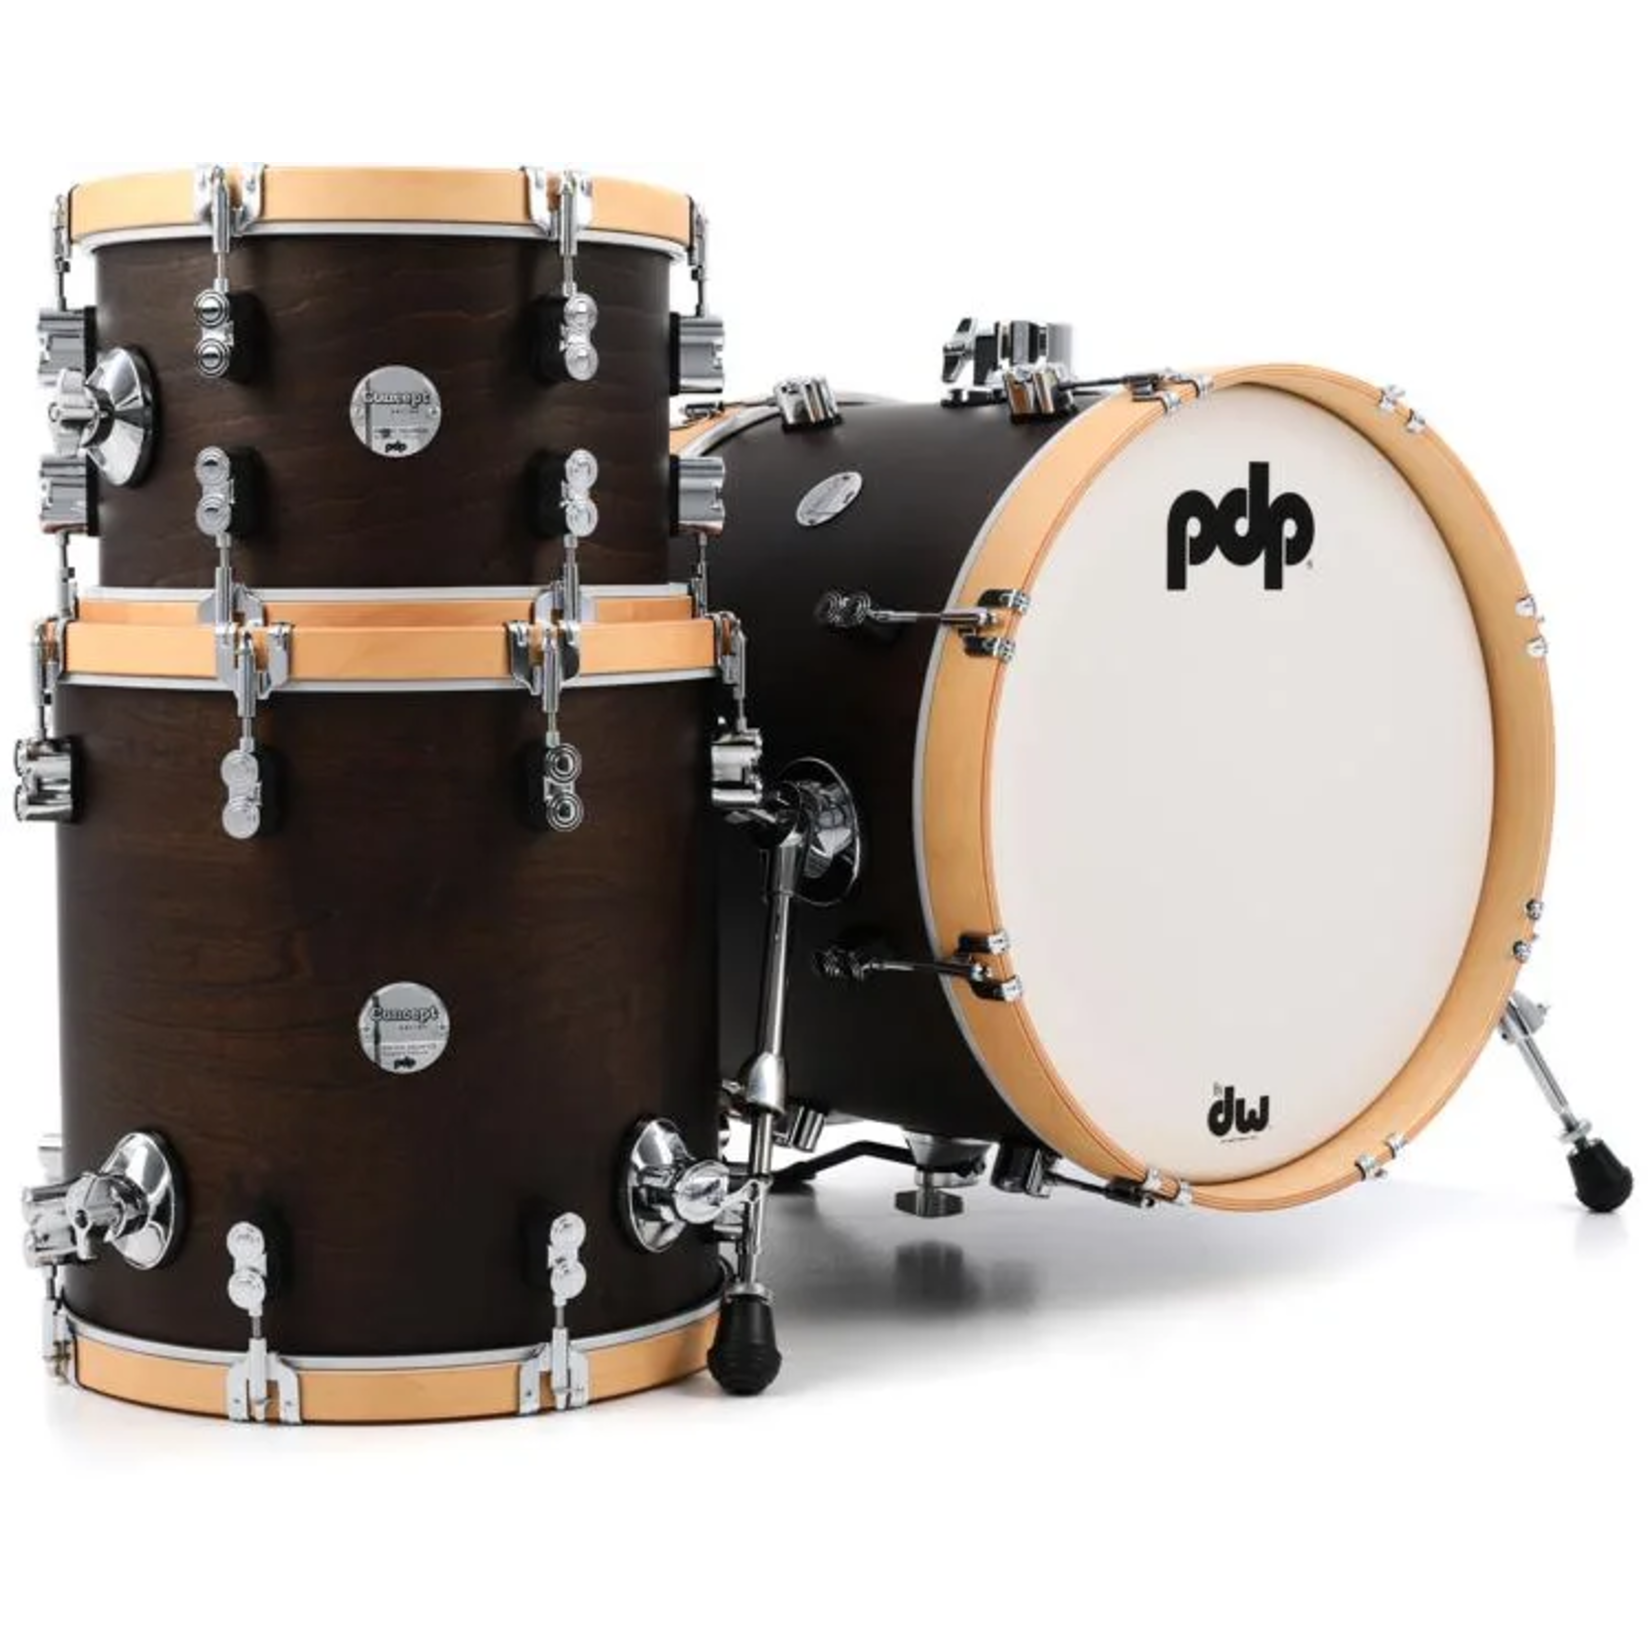 PDP PDP Concept Maple Classic 3pc Bop Drum Kit - "Walnut w/ Natural Hoops"